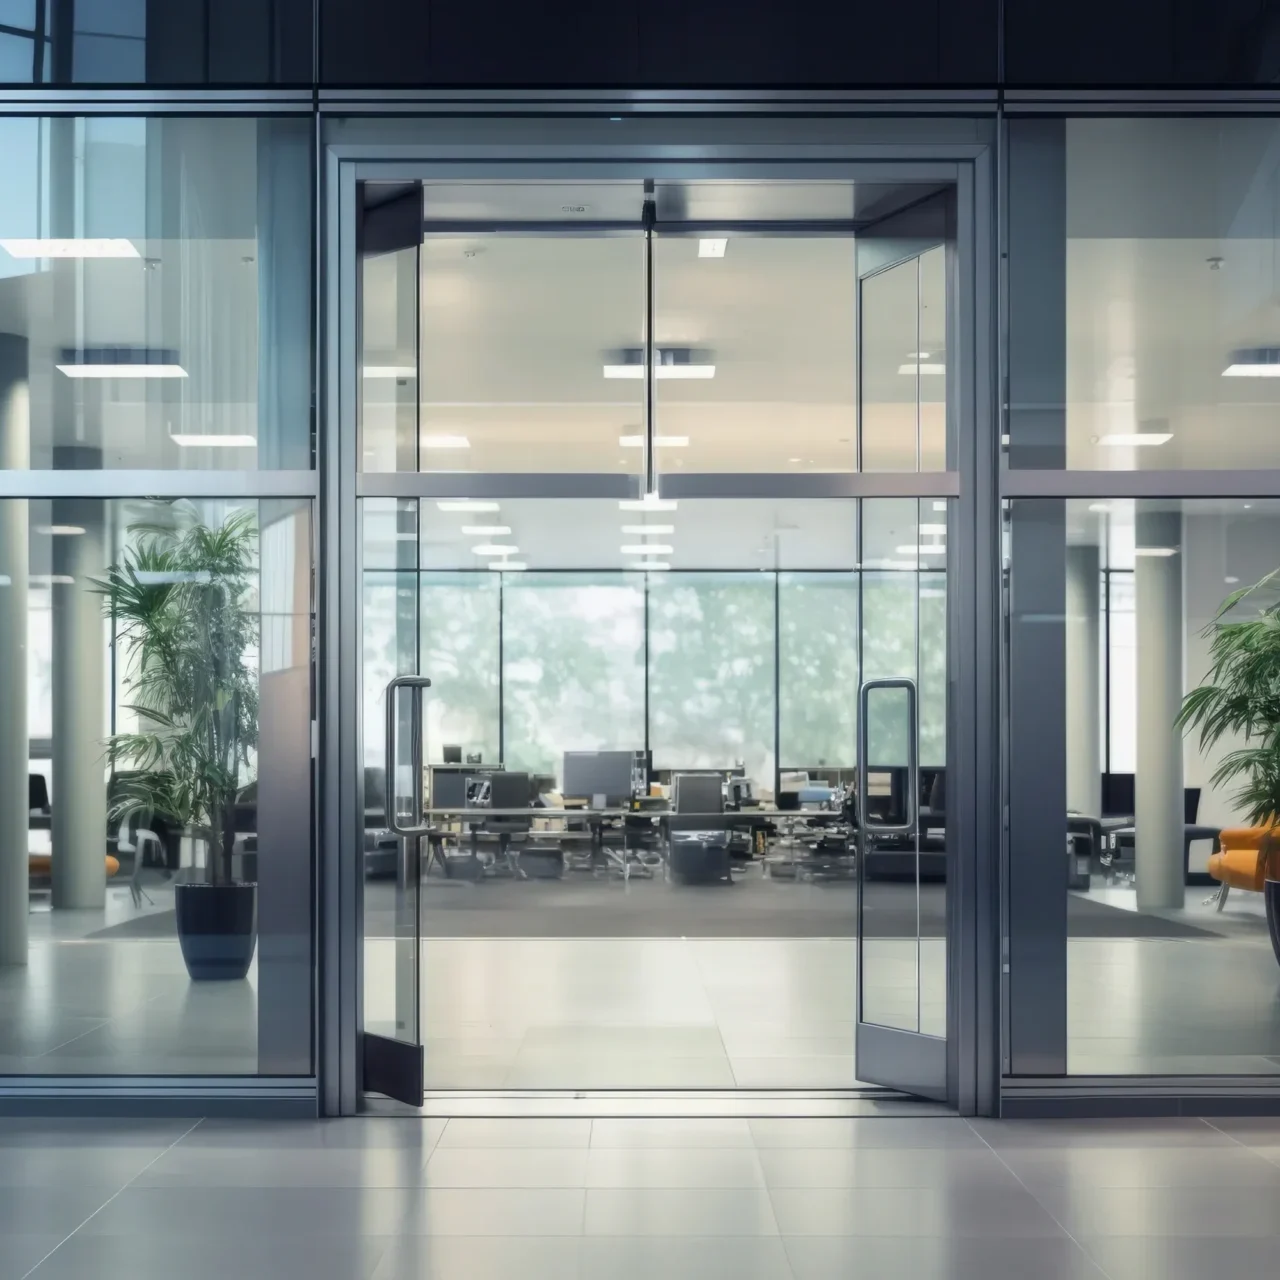 A large glass door leading to an office building.